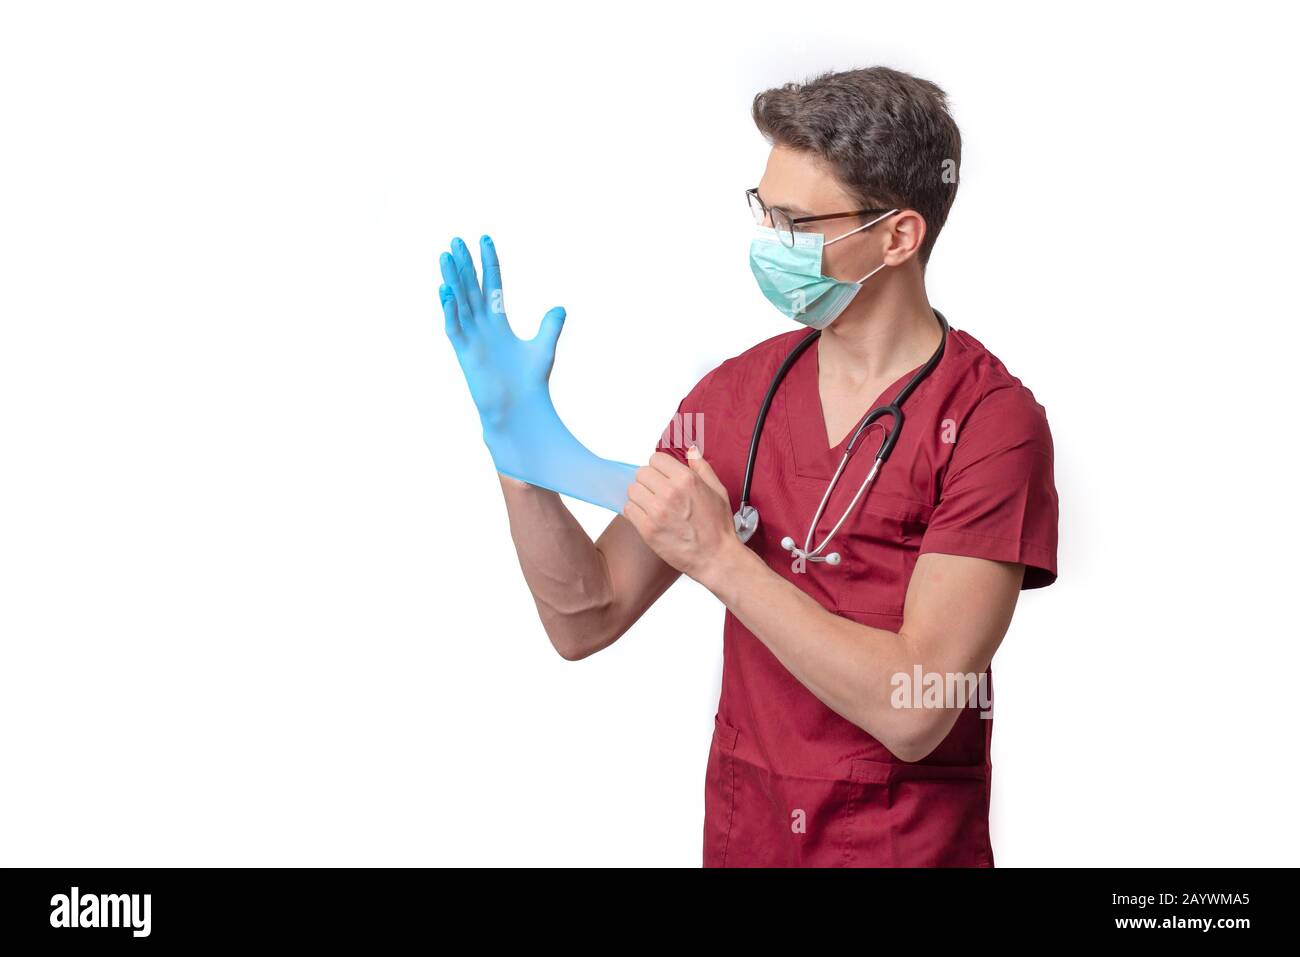 young doctor in uniform getting ready to work putting on gloves isolated on a white background Stock Photo